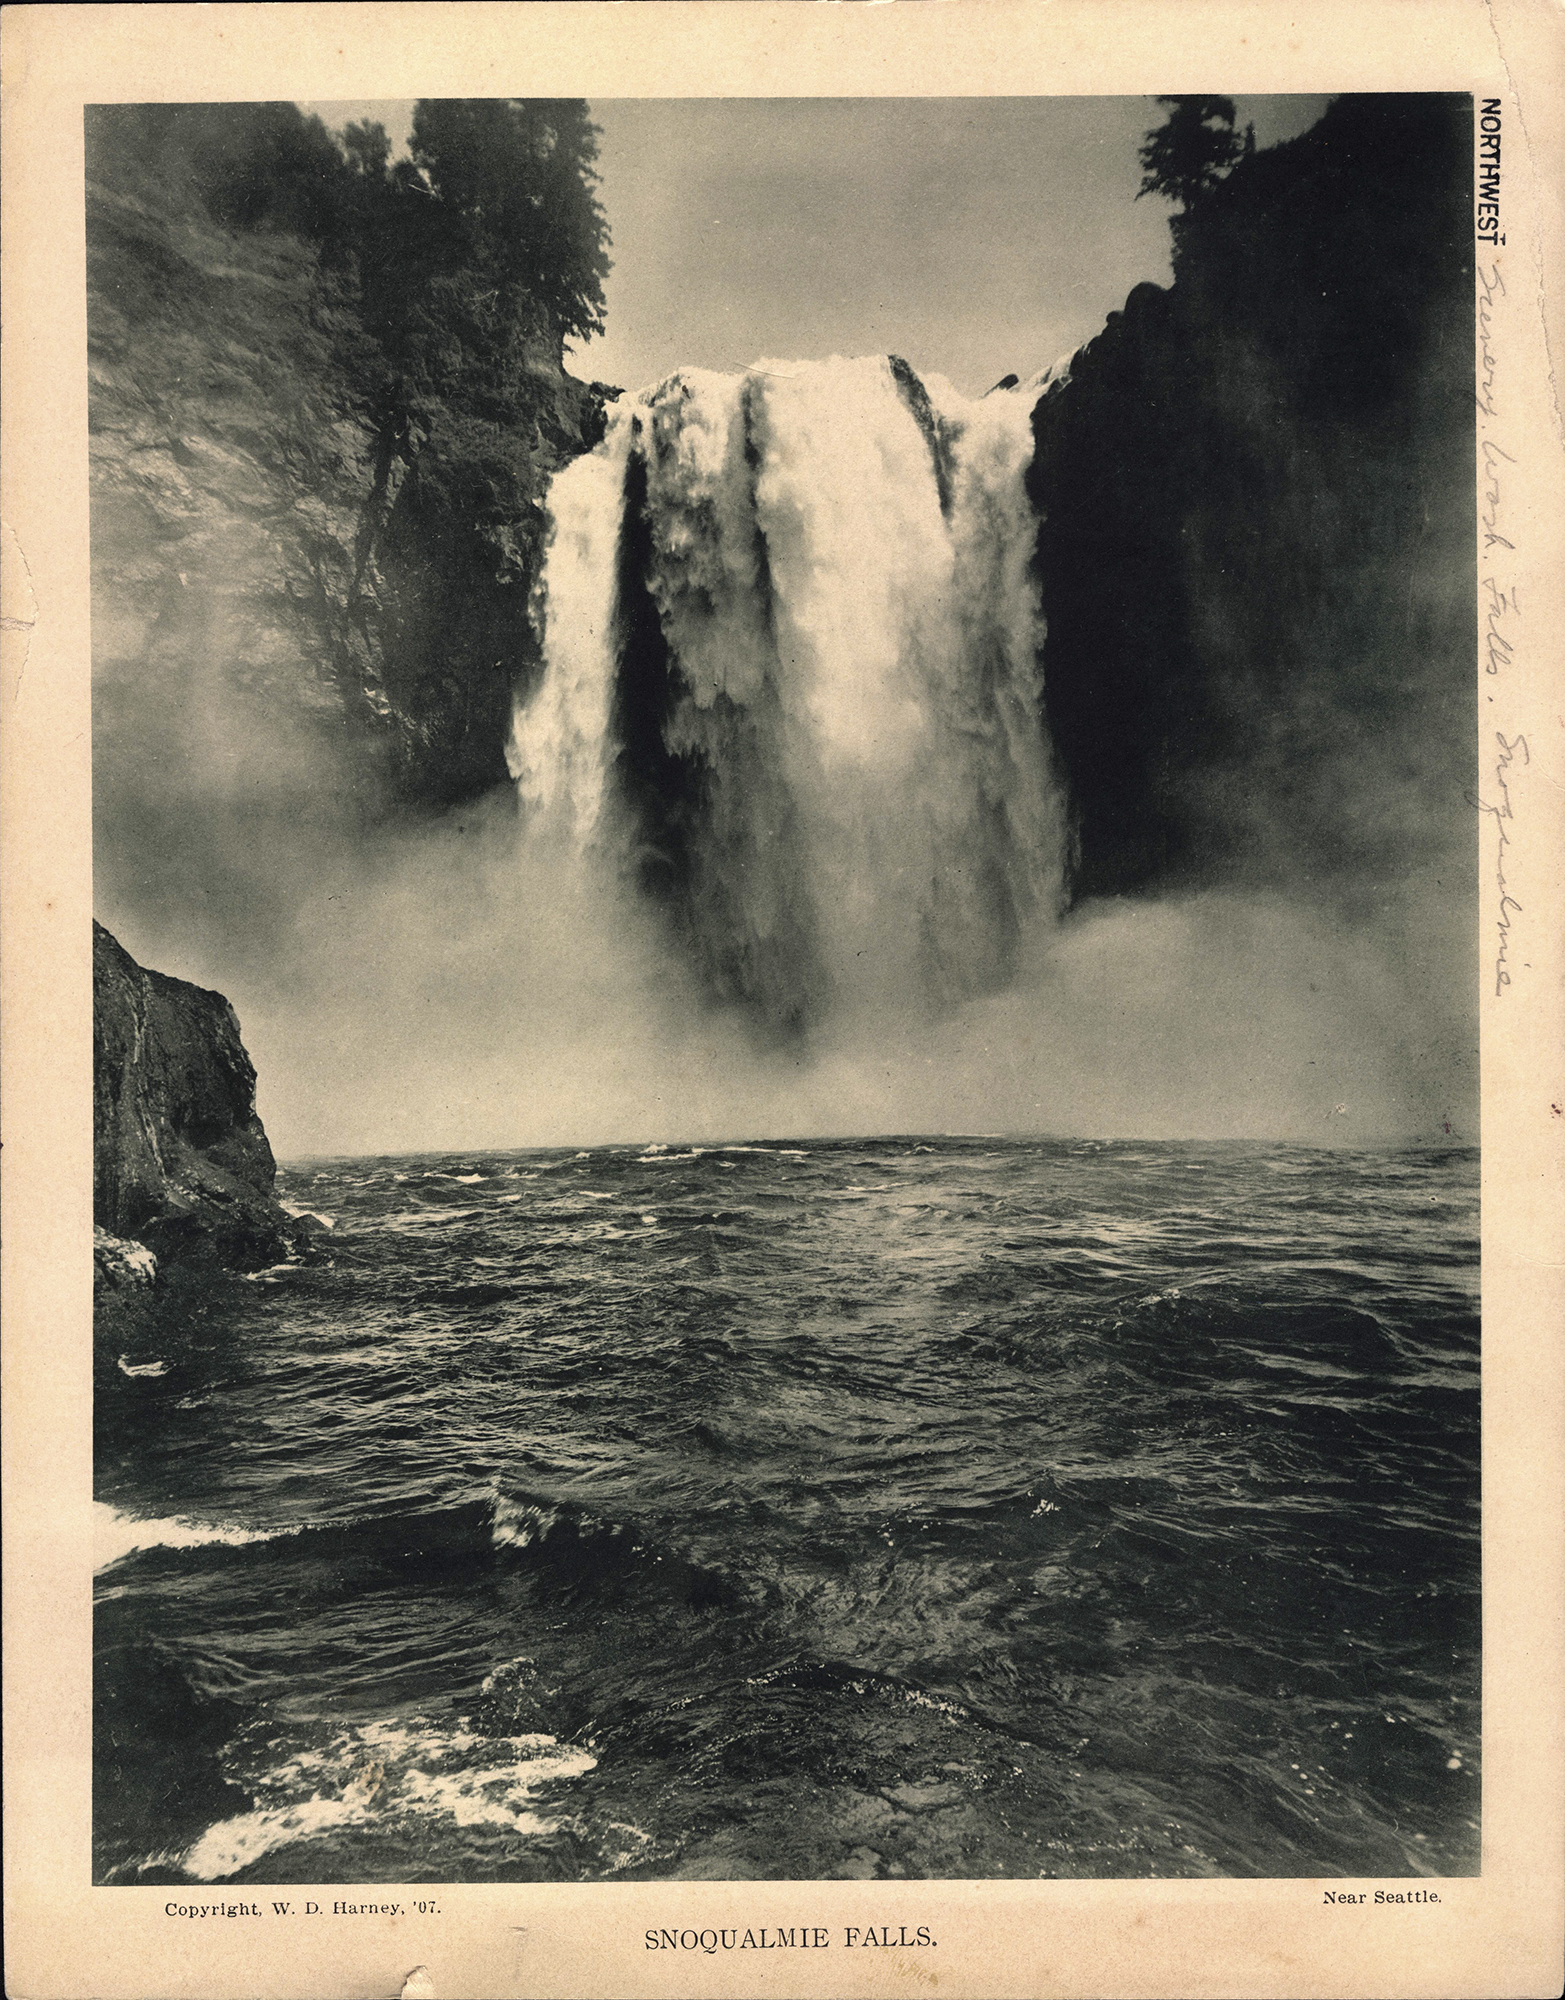 Historical photo of Snoqualmie Falls